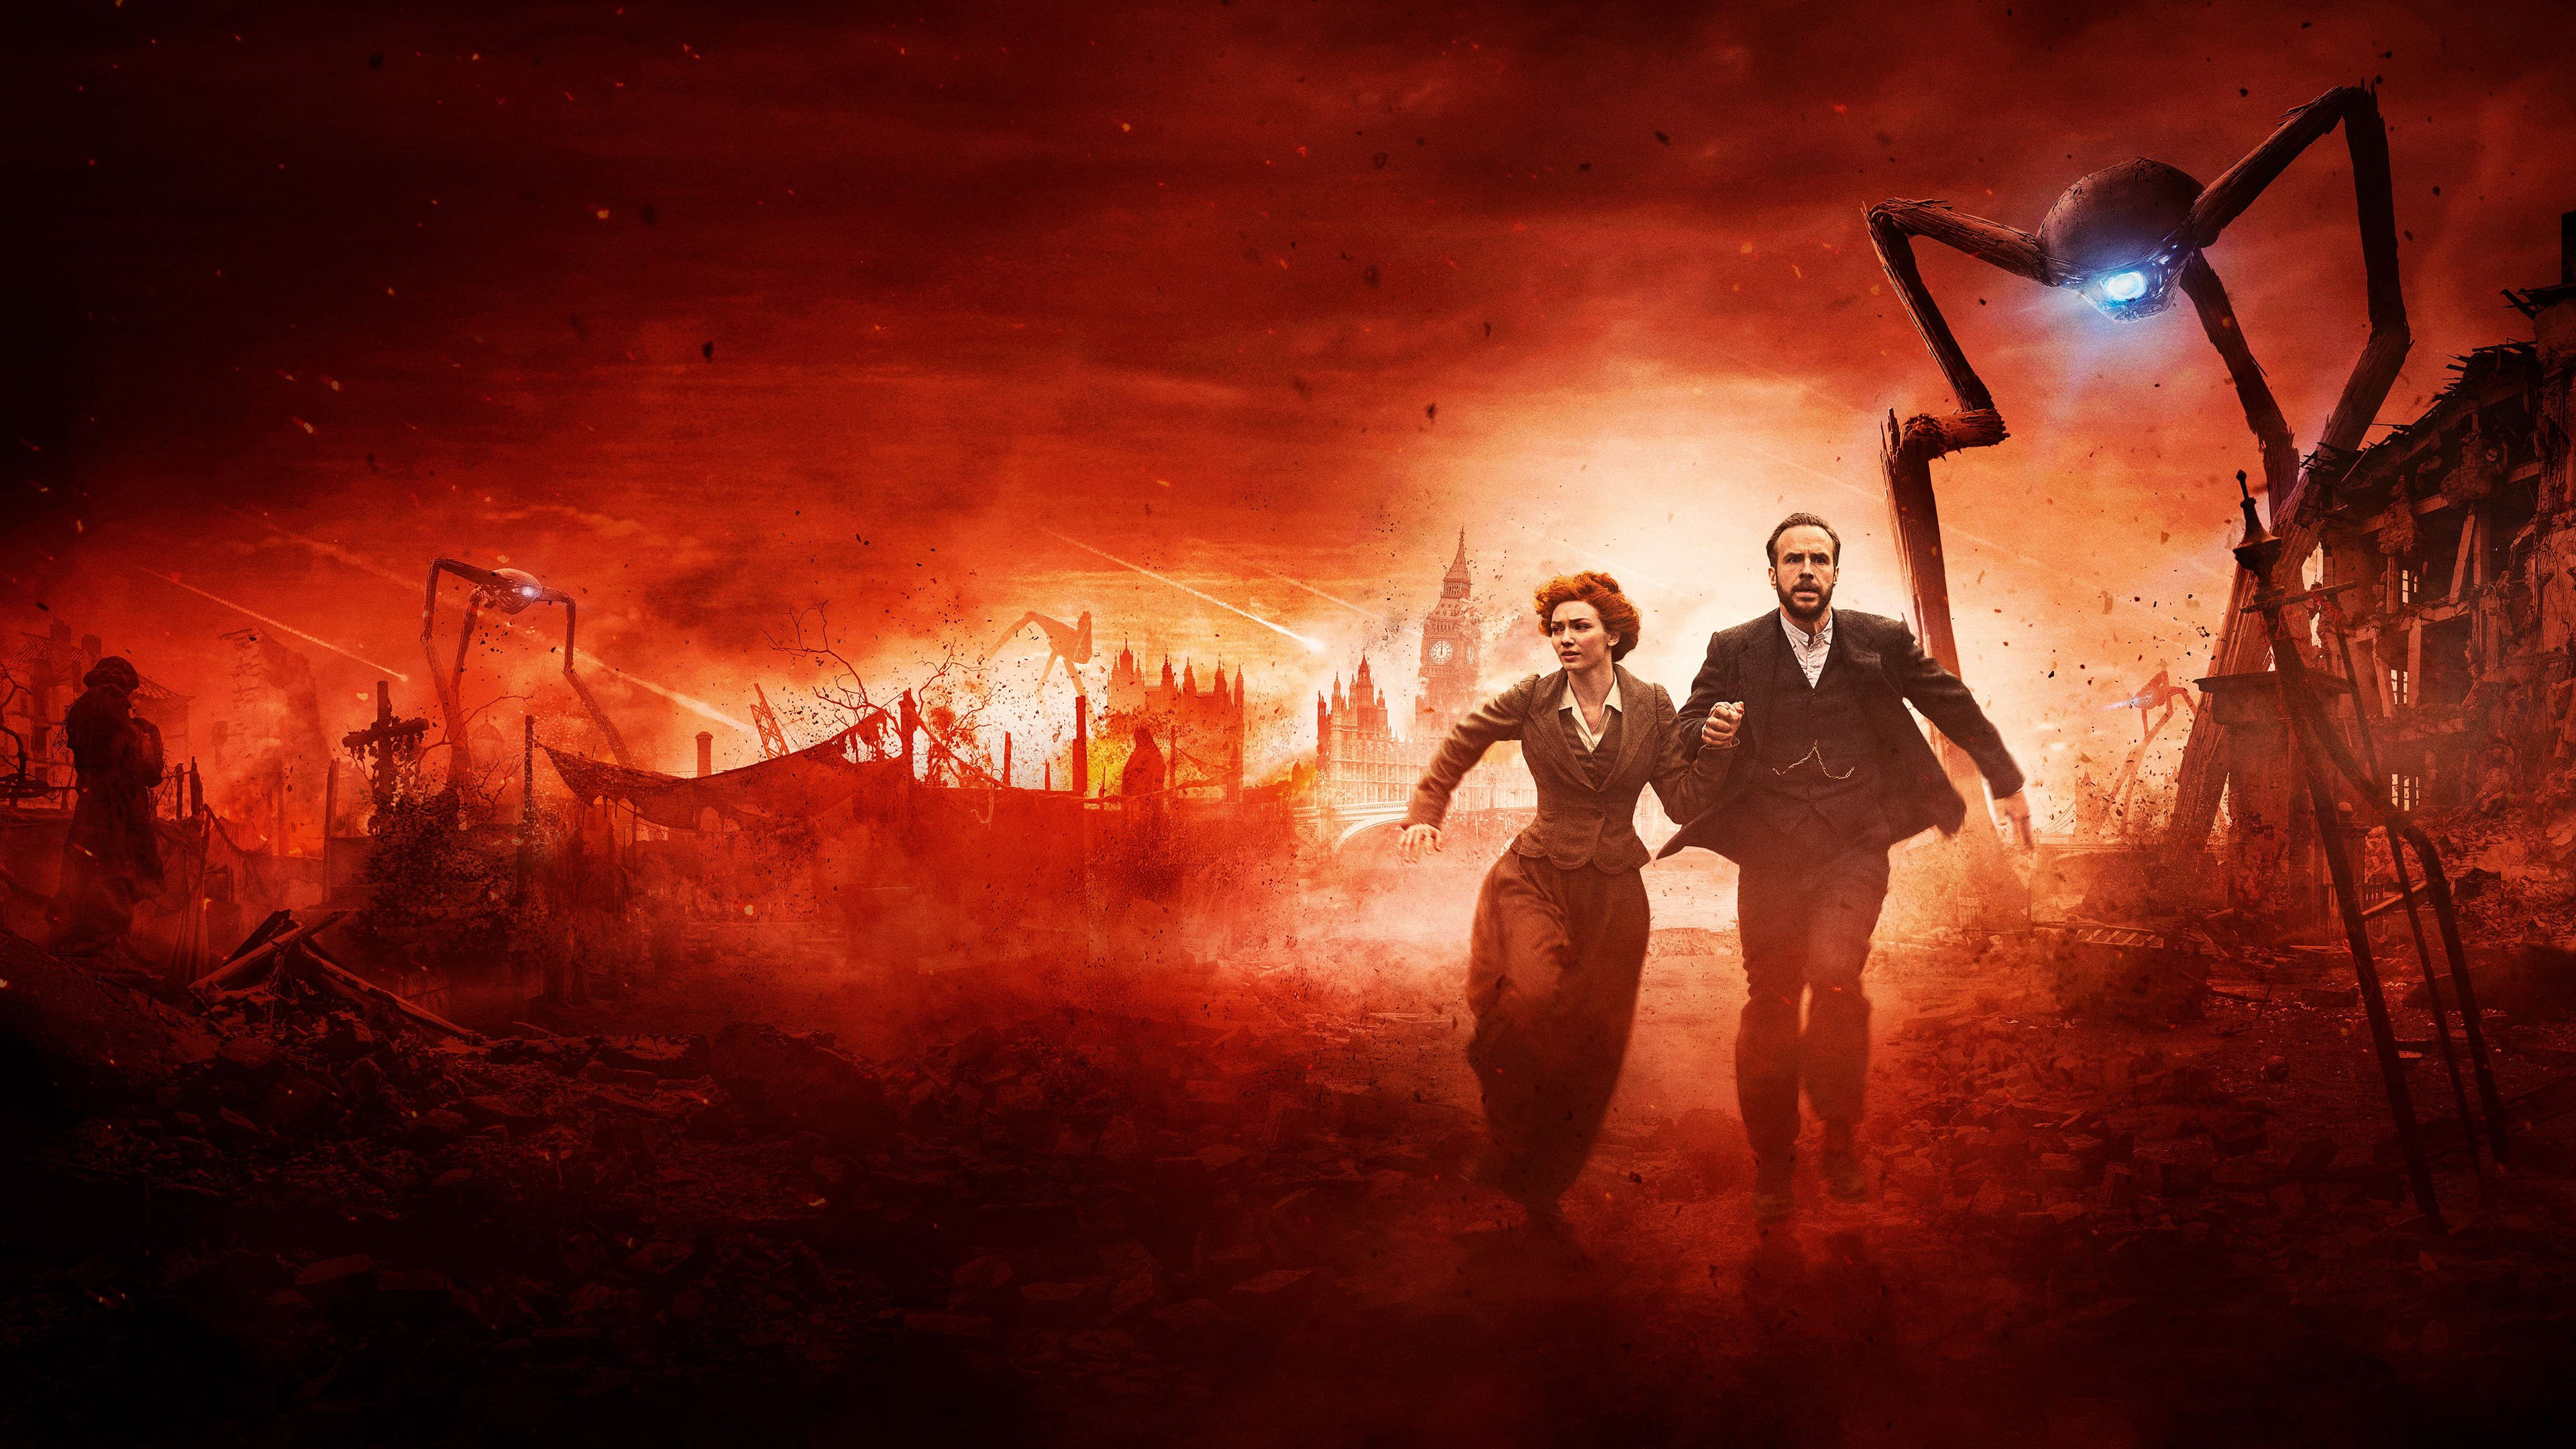 3840x2160 The War Of The Worlds BBC One, HD Tv Shows, 4k Wallpapers, Images, Backgrounds, Photos and Pictures